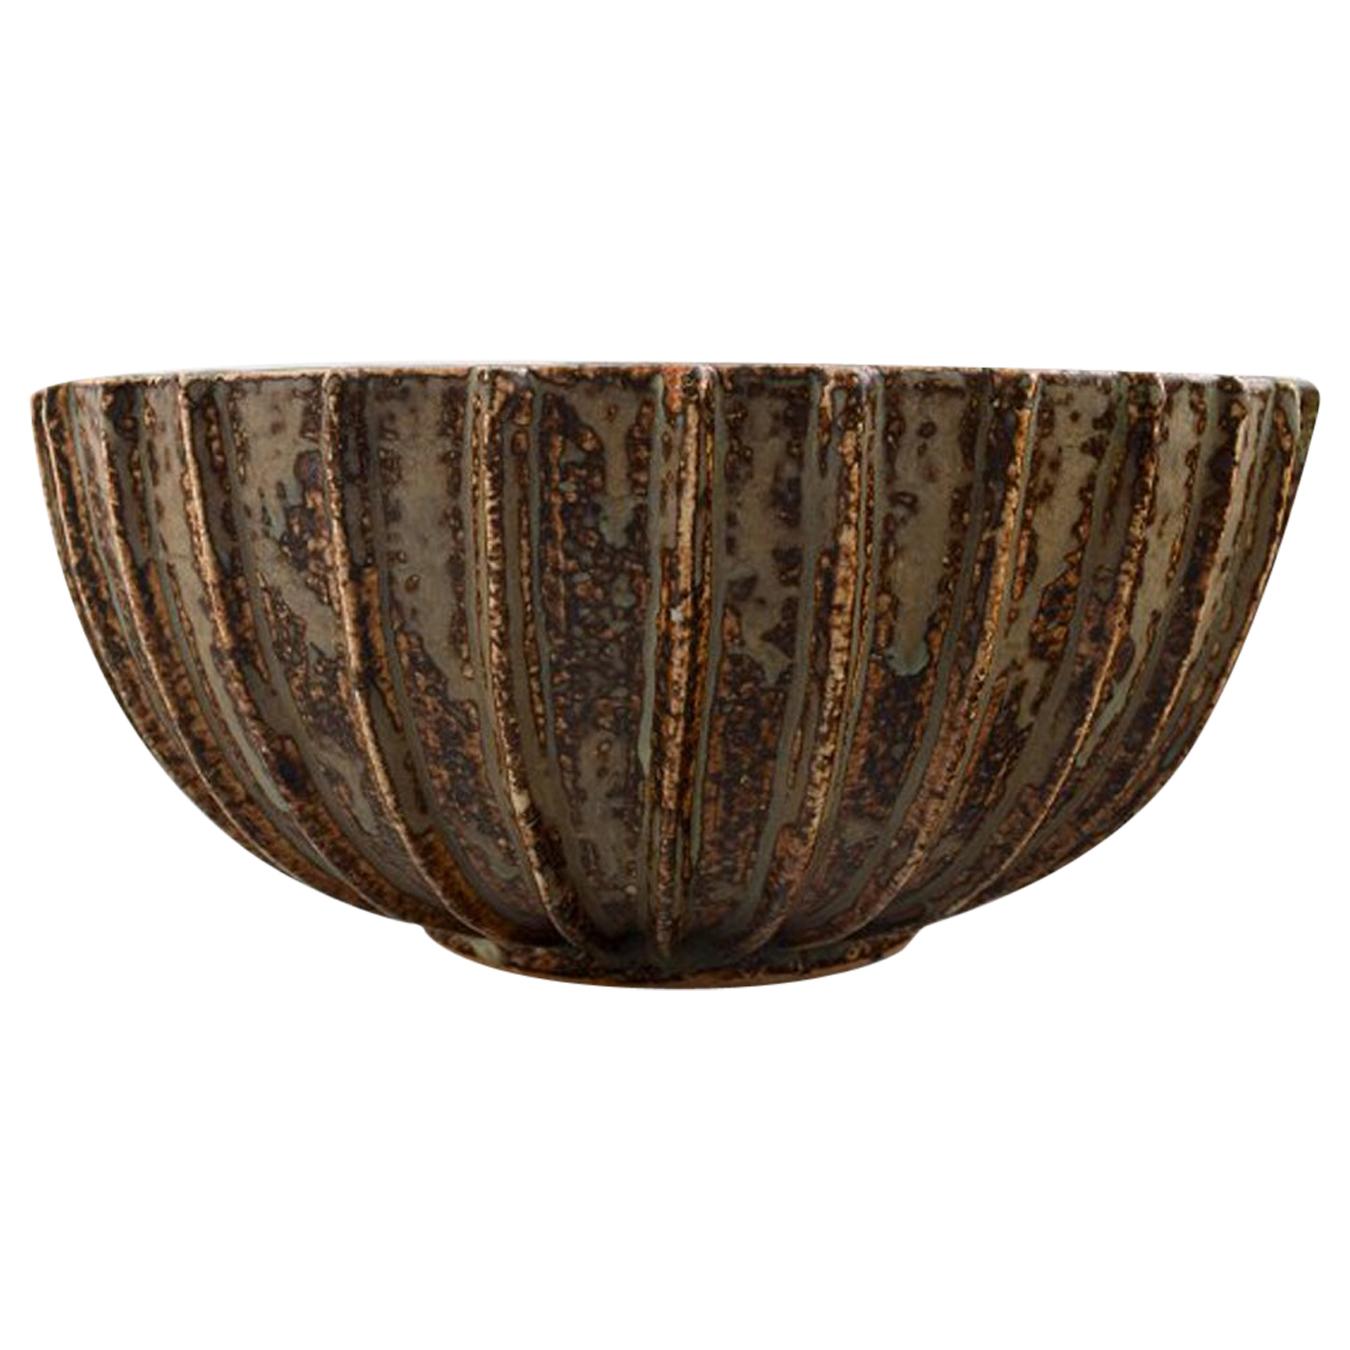 Arne Bang, Large Bowl with Fluted Corpus Decorated with Brown Speckled Glaze